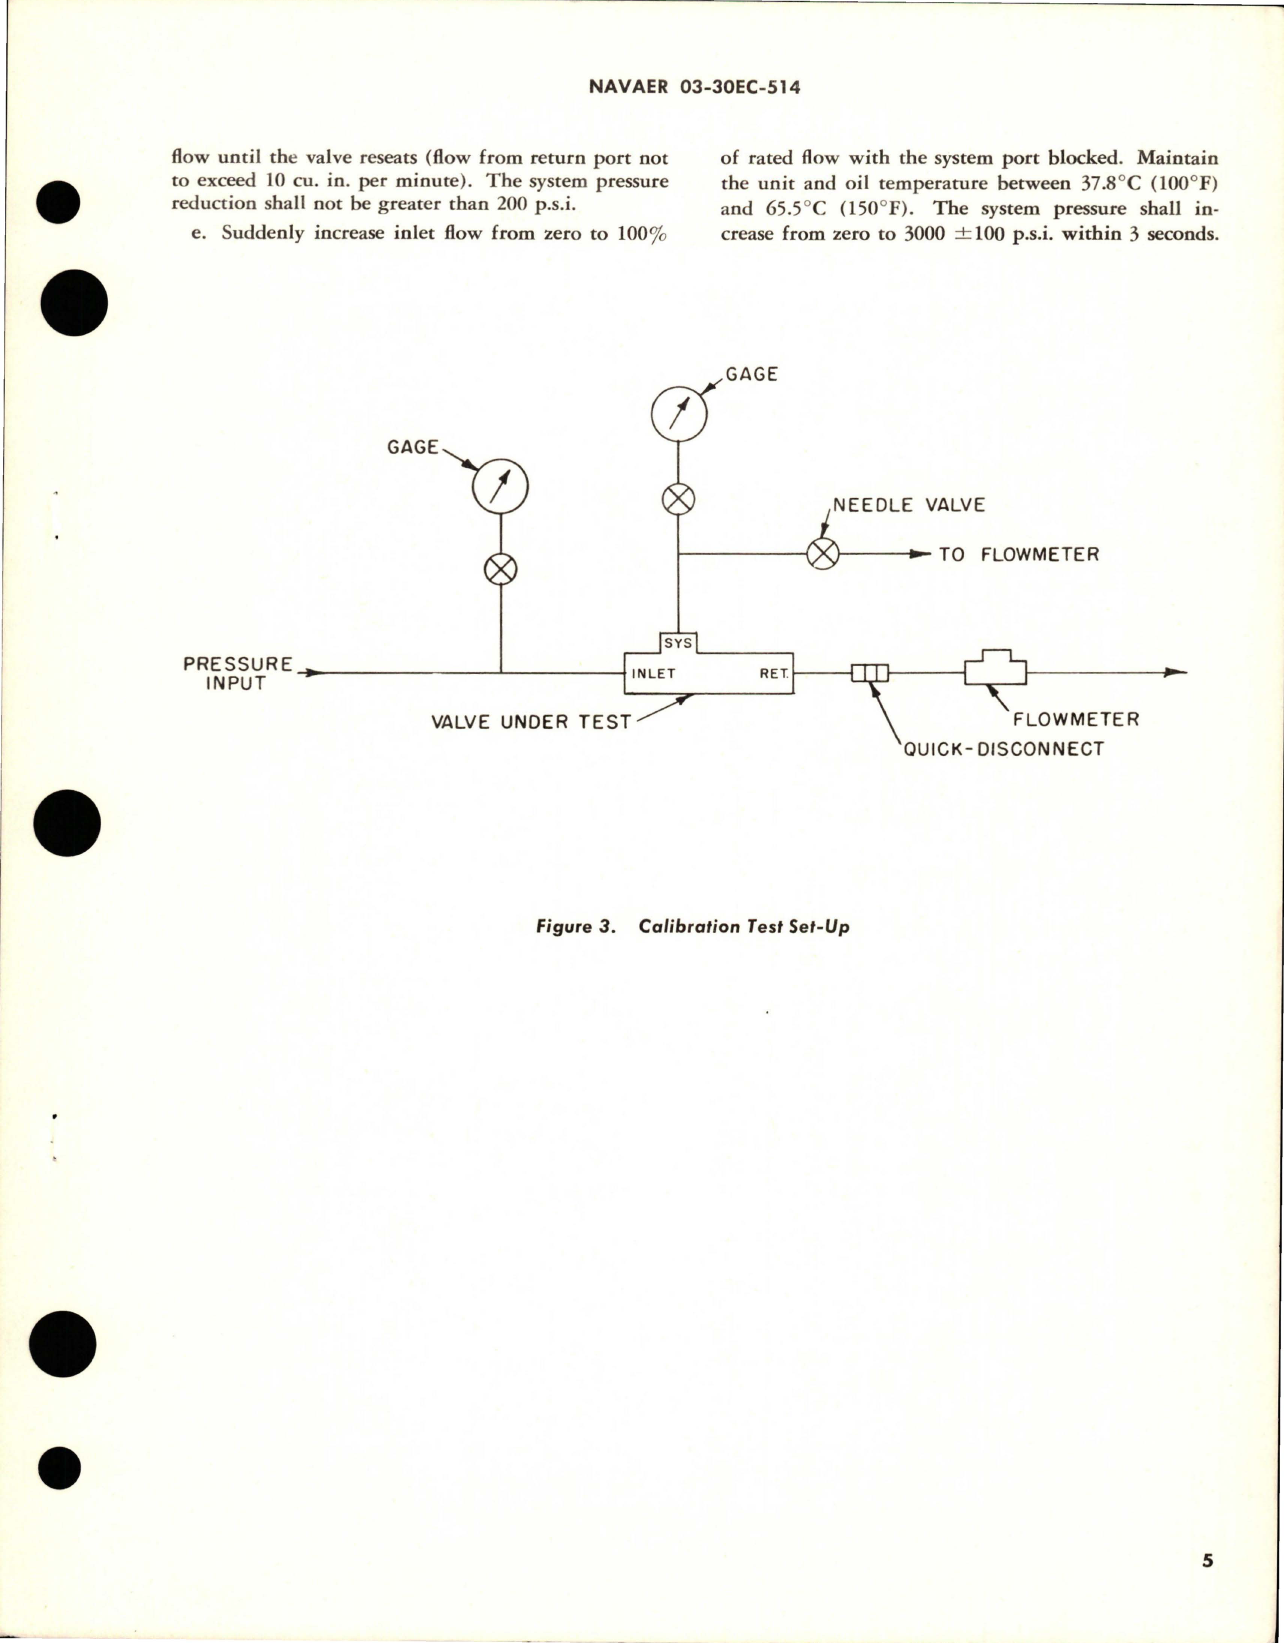 Sample page 5 from AirCorps Library document: Overhaul Instructions with Parts for Hydraulic Flow Sensitive Pressure Regulator Valve - AFS-6-01